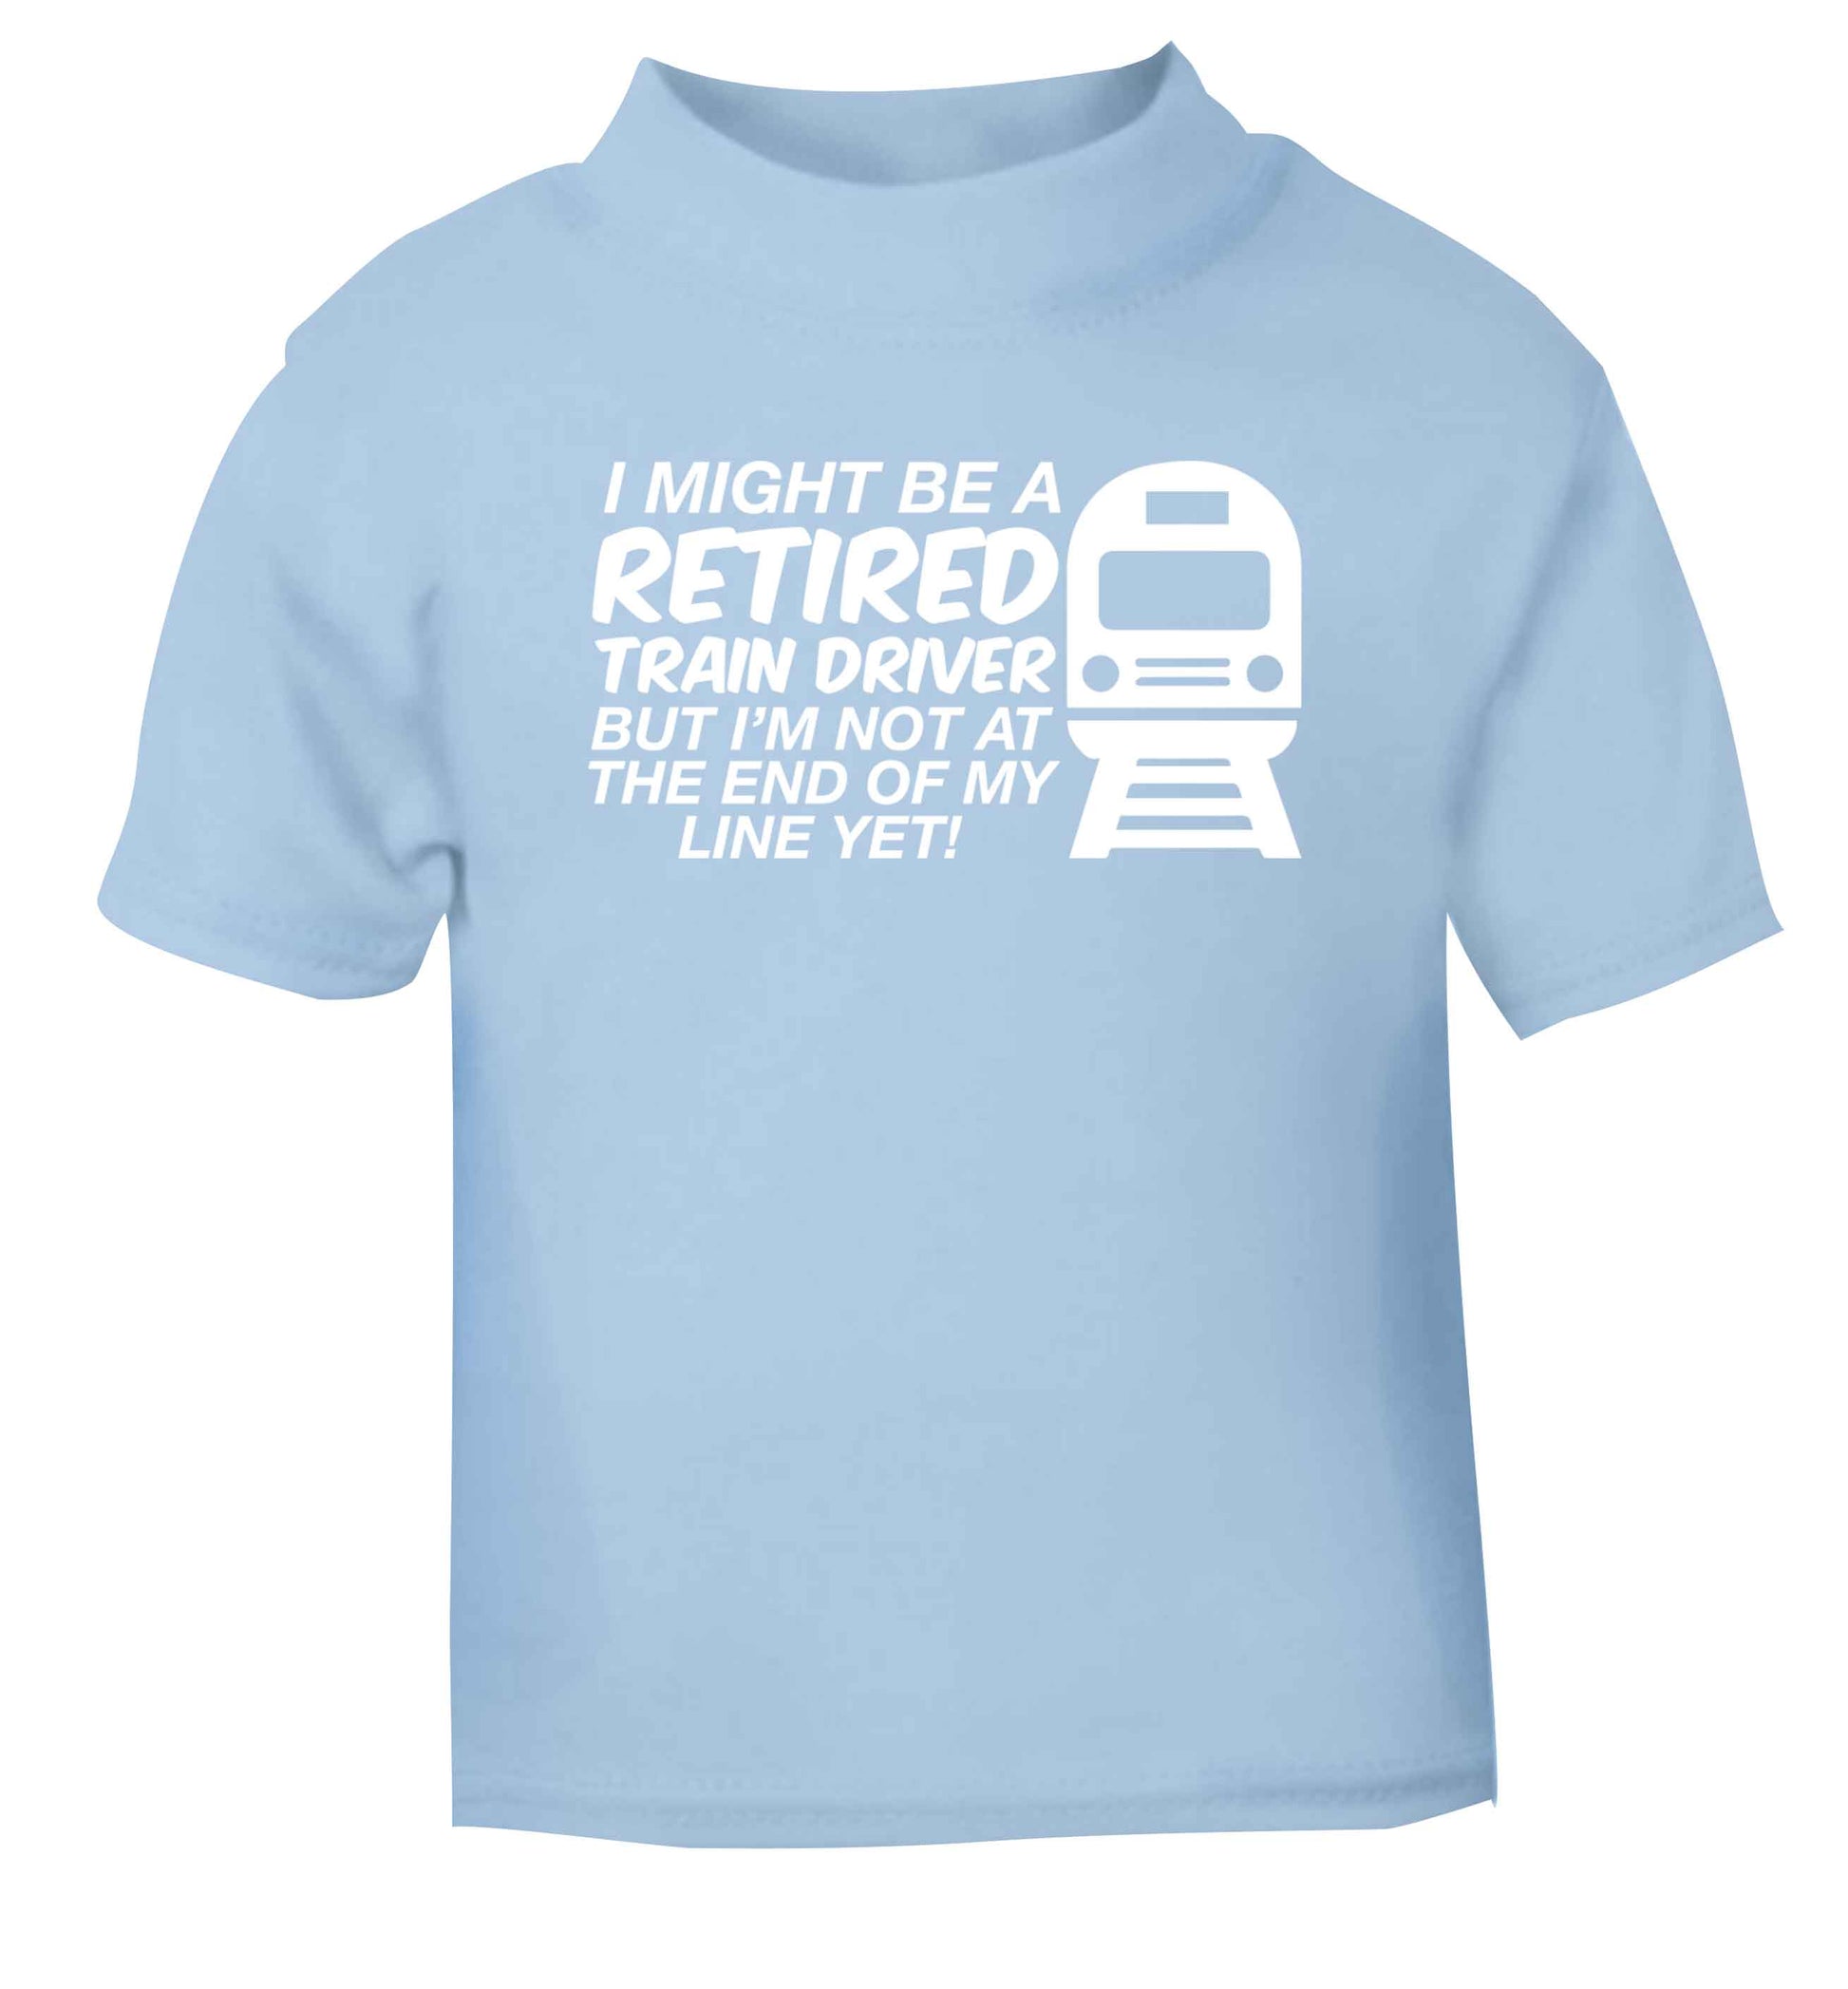 Retired train driver but I'm not at the end of my line yet light blue Baby Toddler Tshirt 2 Years